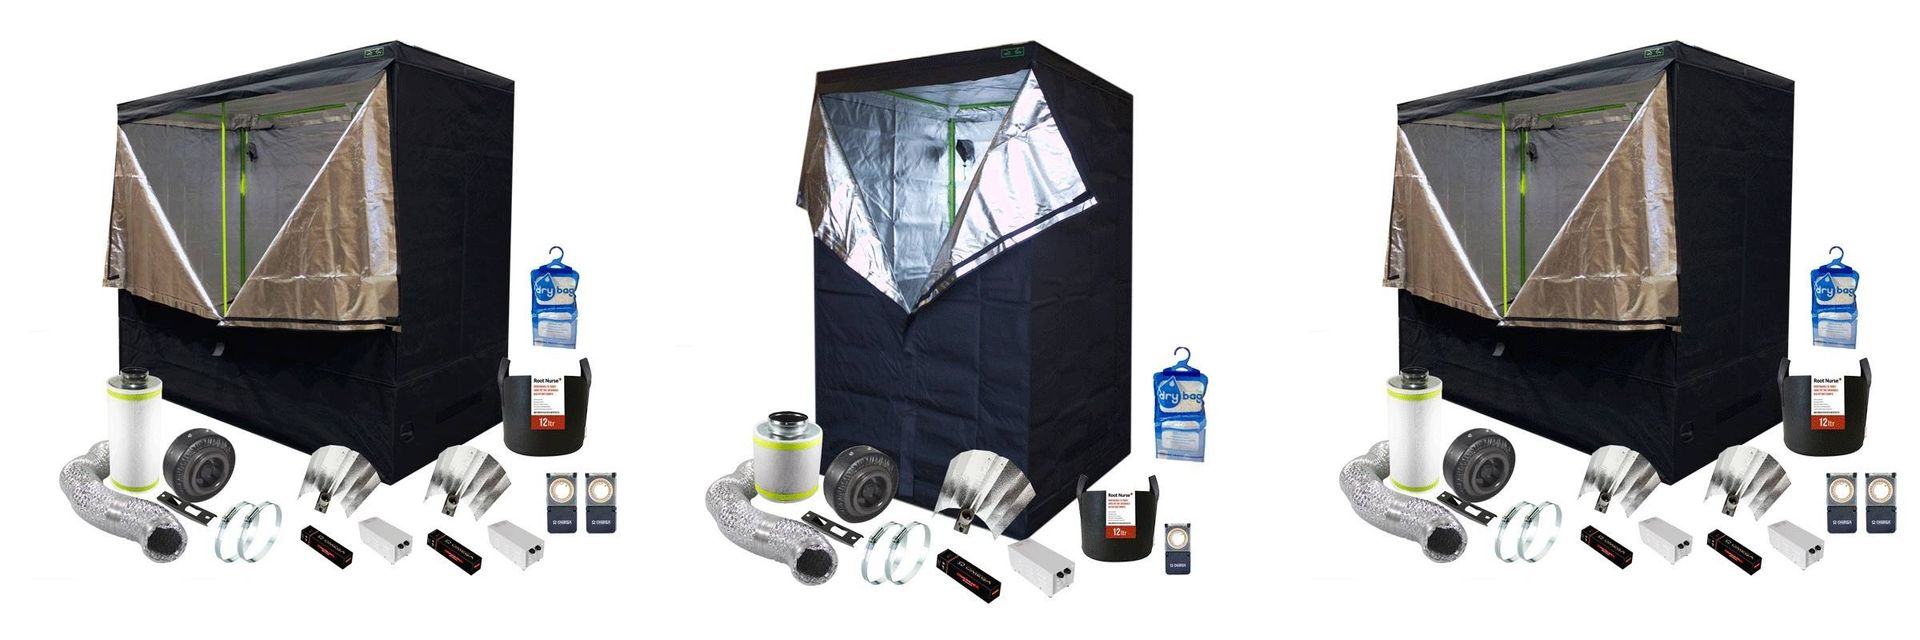 These hydroponic urban tent kits contain all the accessories such as lighting, reflectors, vents and fans